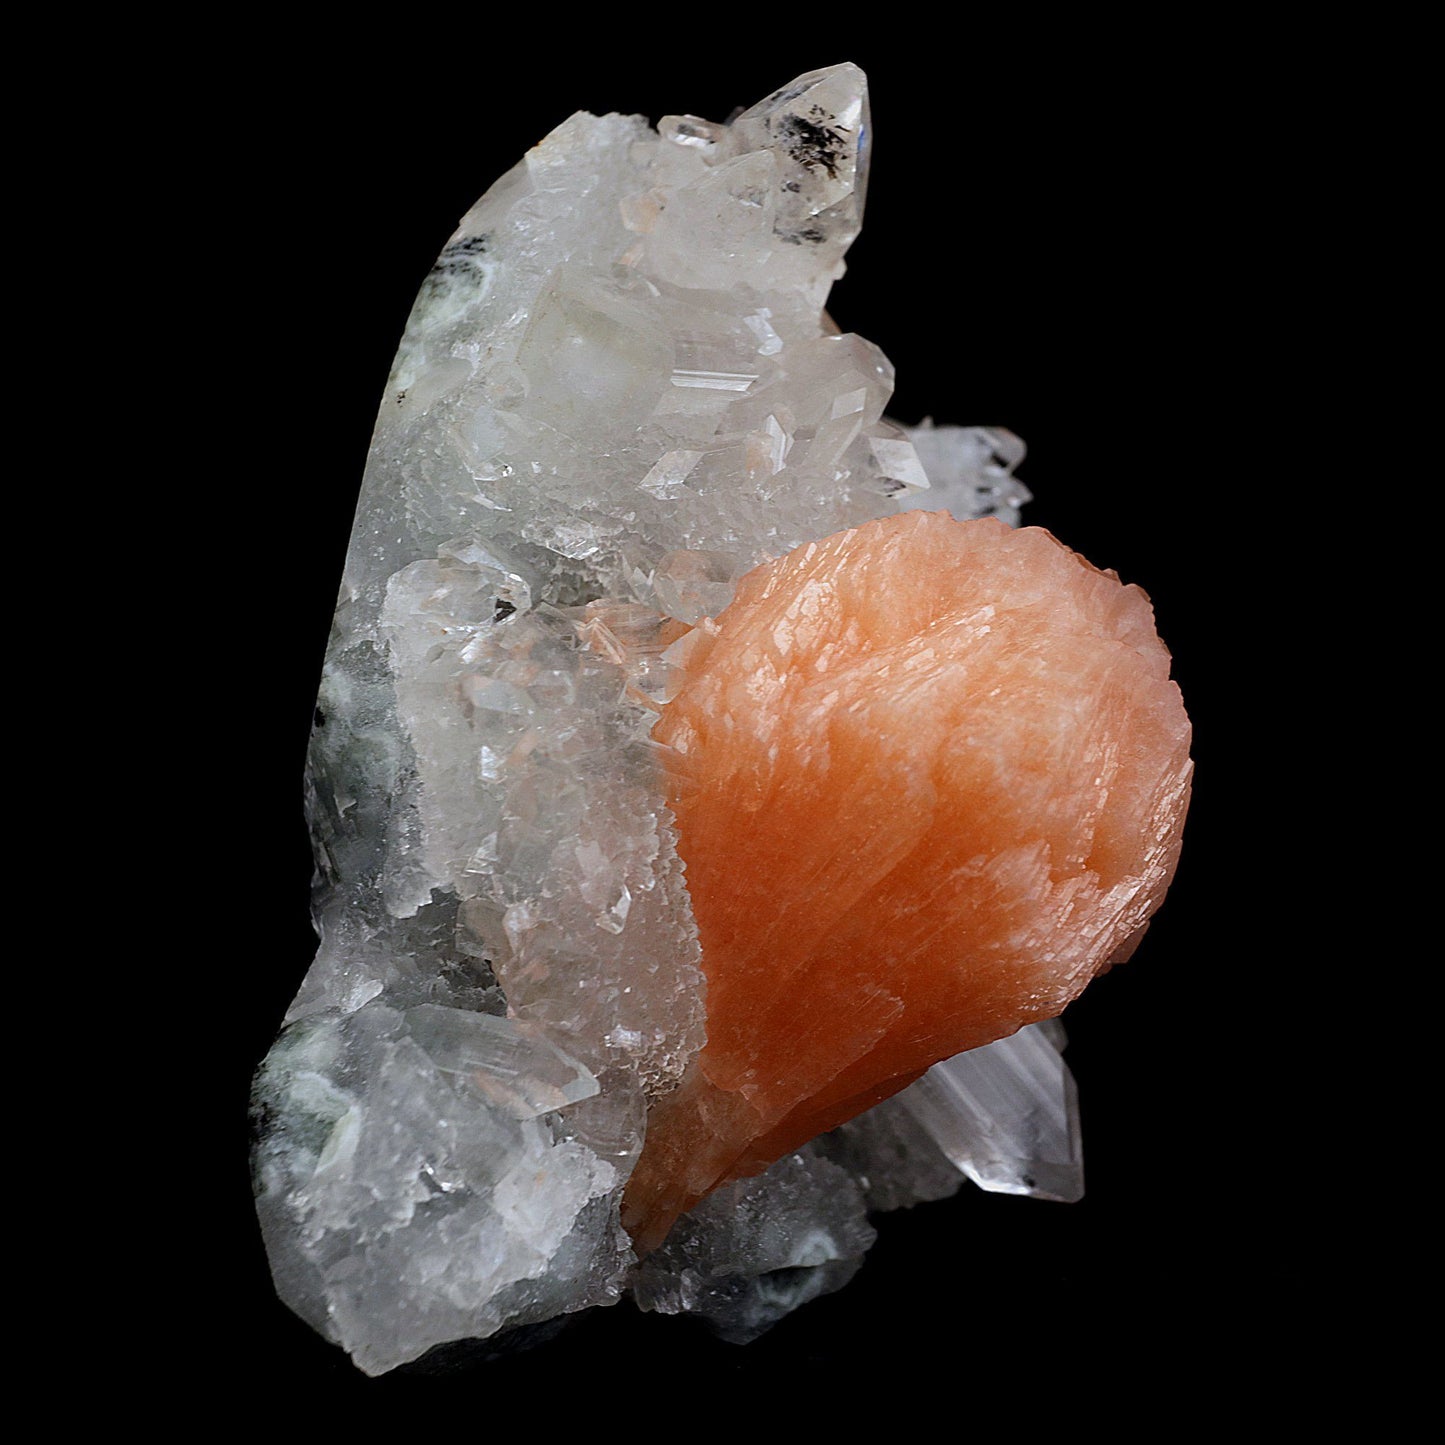 Stilbite Cluster on Gemmy Apophyllite With MM Quartz Natural Mineral S…  https://www.superbminerals.us/products/stilbite-cluster-on-gemmy-apophyllite-natural-mineral-specimen-b-4081  Features:Classic combination specimen from the basalt trap rock quarries of India featuring a Apophyllite crystal cluster with a Stilbite. While common in general, this is really a special piece - more beautiful and sparkly than most. The Apophyllite is glassy, transparent to translucent and composed of several